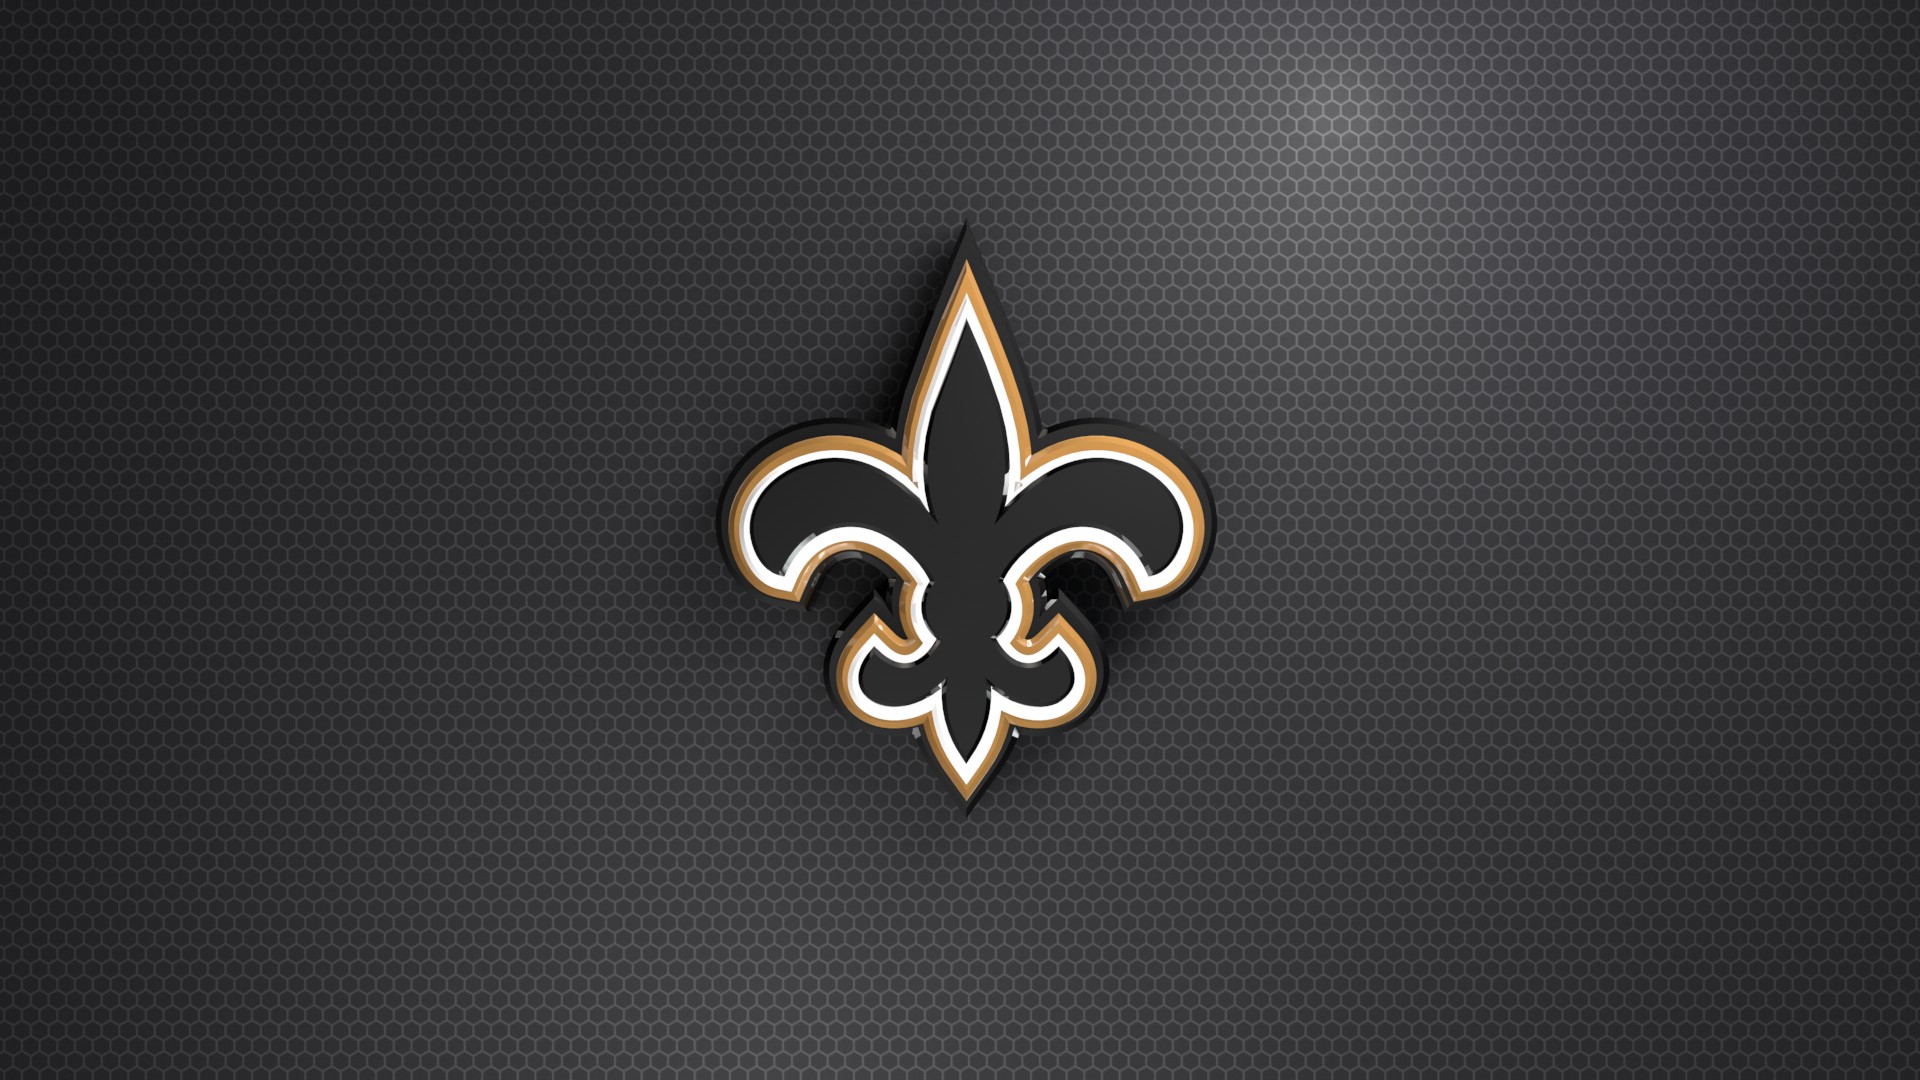 Wallpapers New Orleans Saints With Resolution 1920X1080 pixel. You can make this wallpaper for your Mac or Windows Desktop Background, iPhone, Android or Tablet and another Smartphone device for free